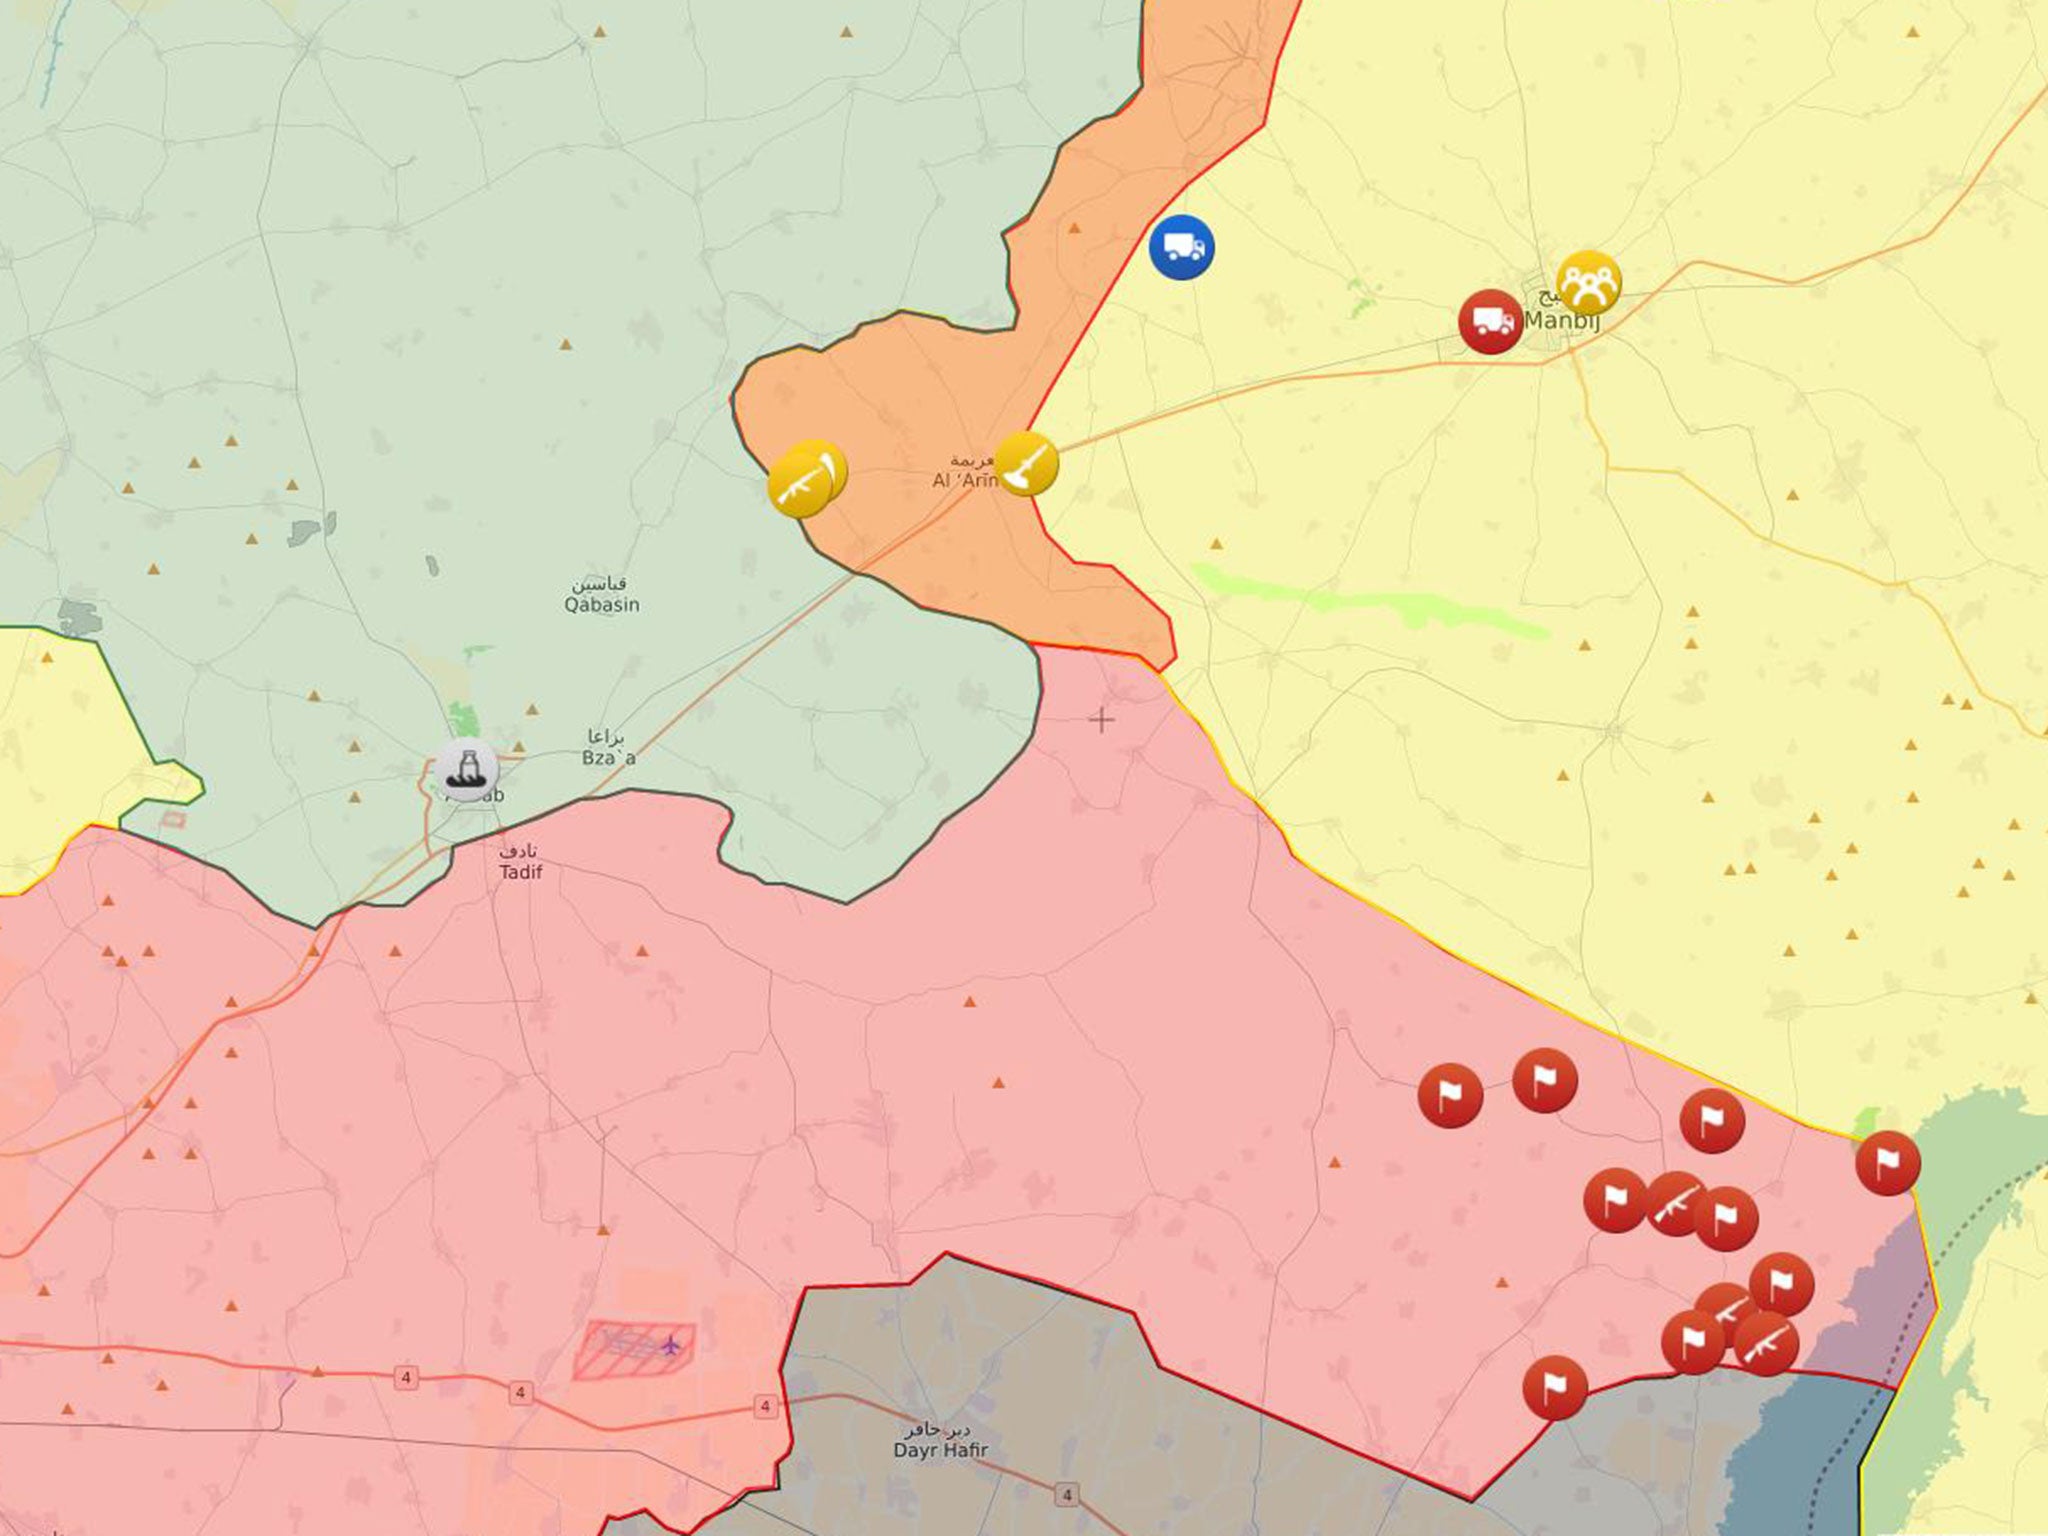 The converging frontlines near al-Bab between parties in the Syrian civil war. Territory controlled by Isis is seen in black, the Syrian government in red, Turkey-backed opposition in blue/green, Kurdish-led Syrian Democratic forces in yellow and Kurdish territory occupied by government forces in orange